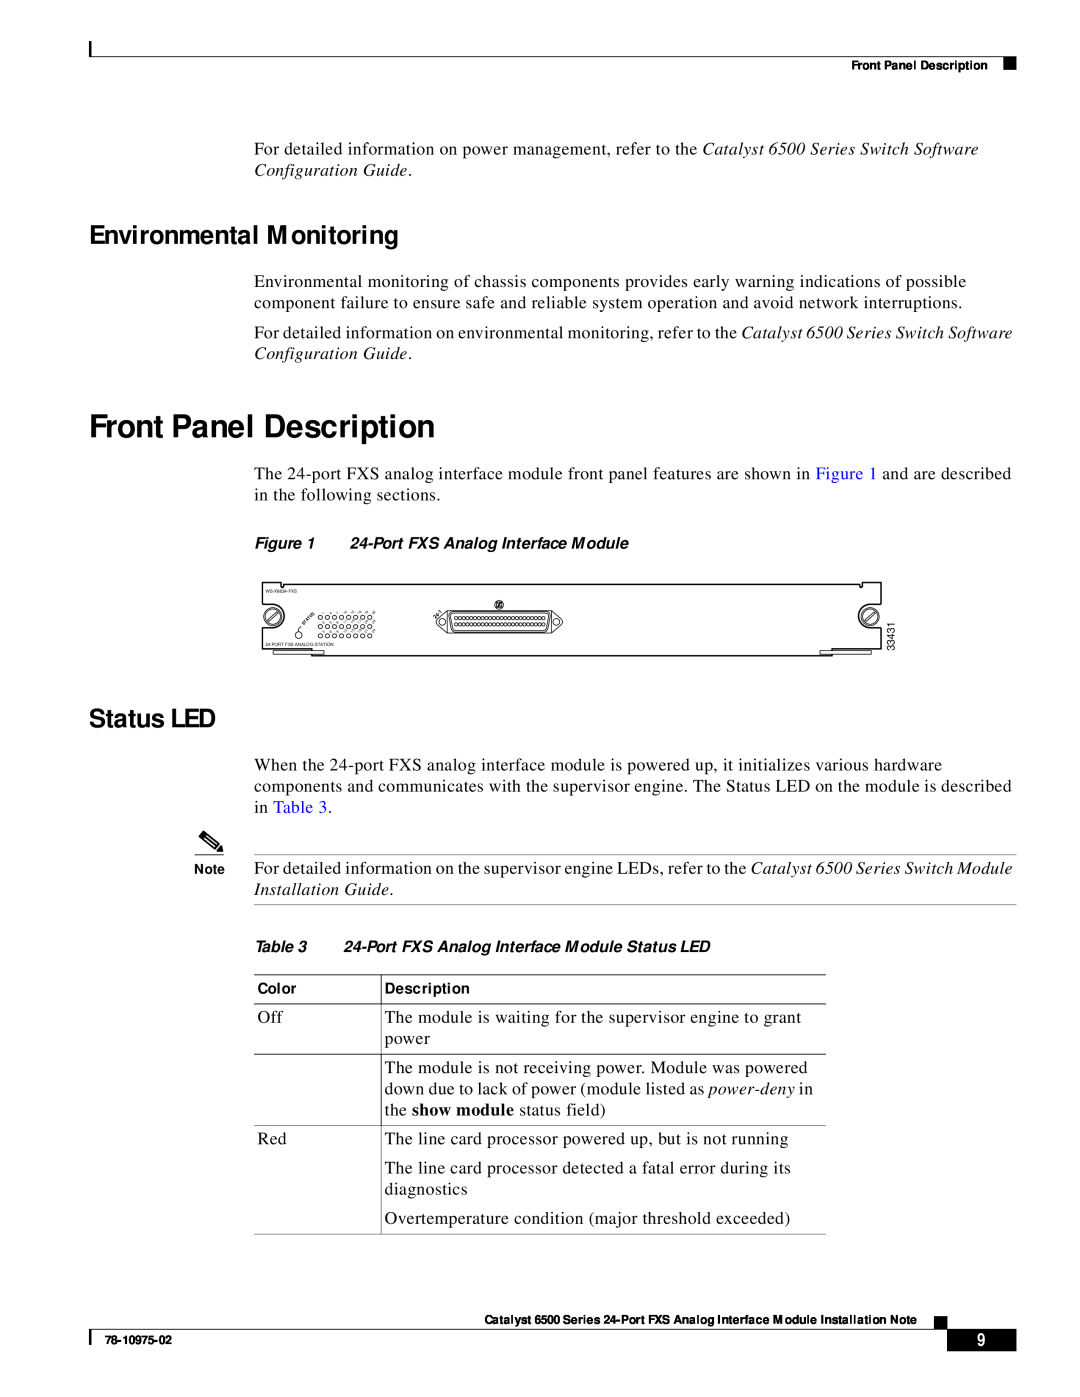 Cisco Systems WS-X6624-FXS specifications Front Panel Description, Environmental Monitoring, Status LED 